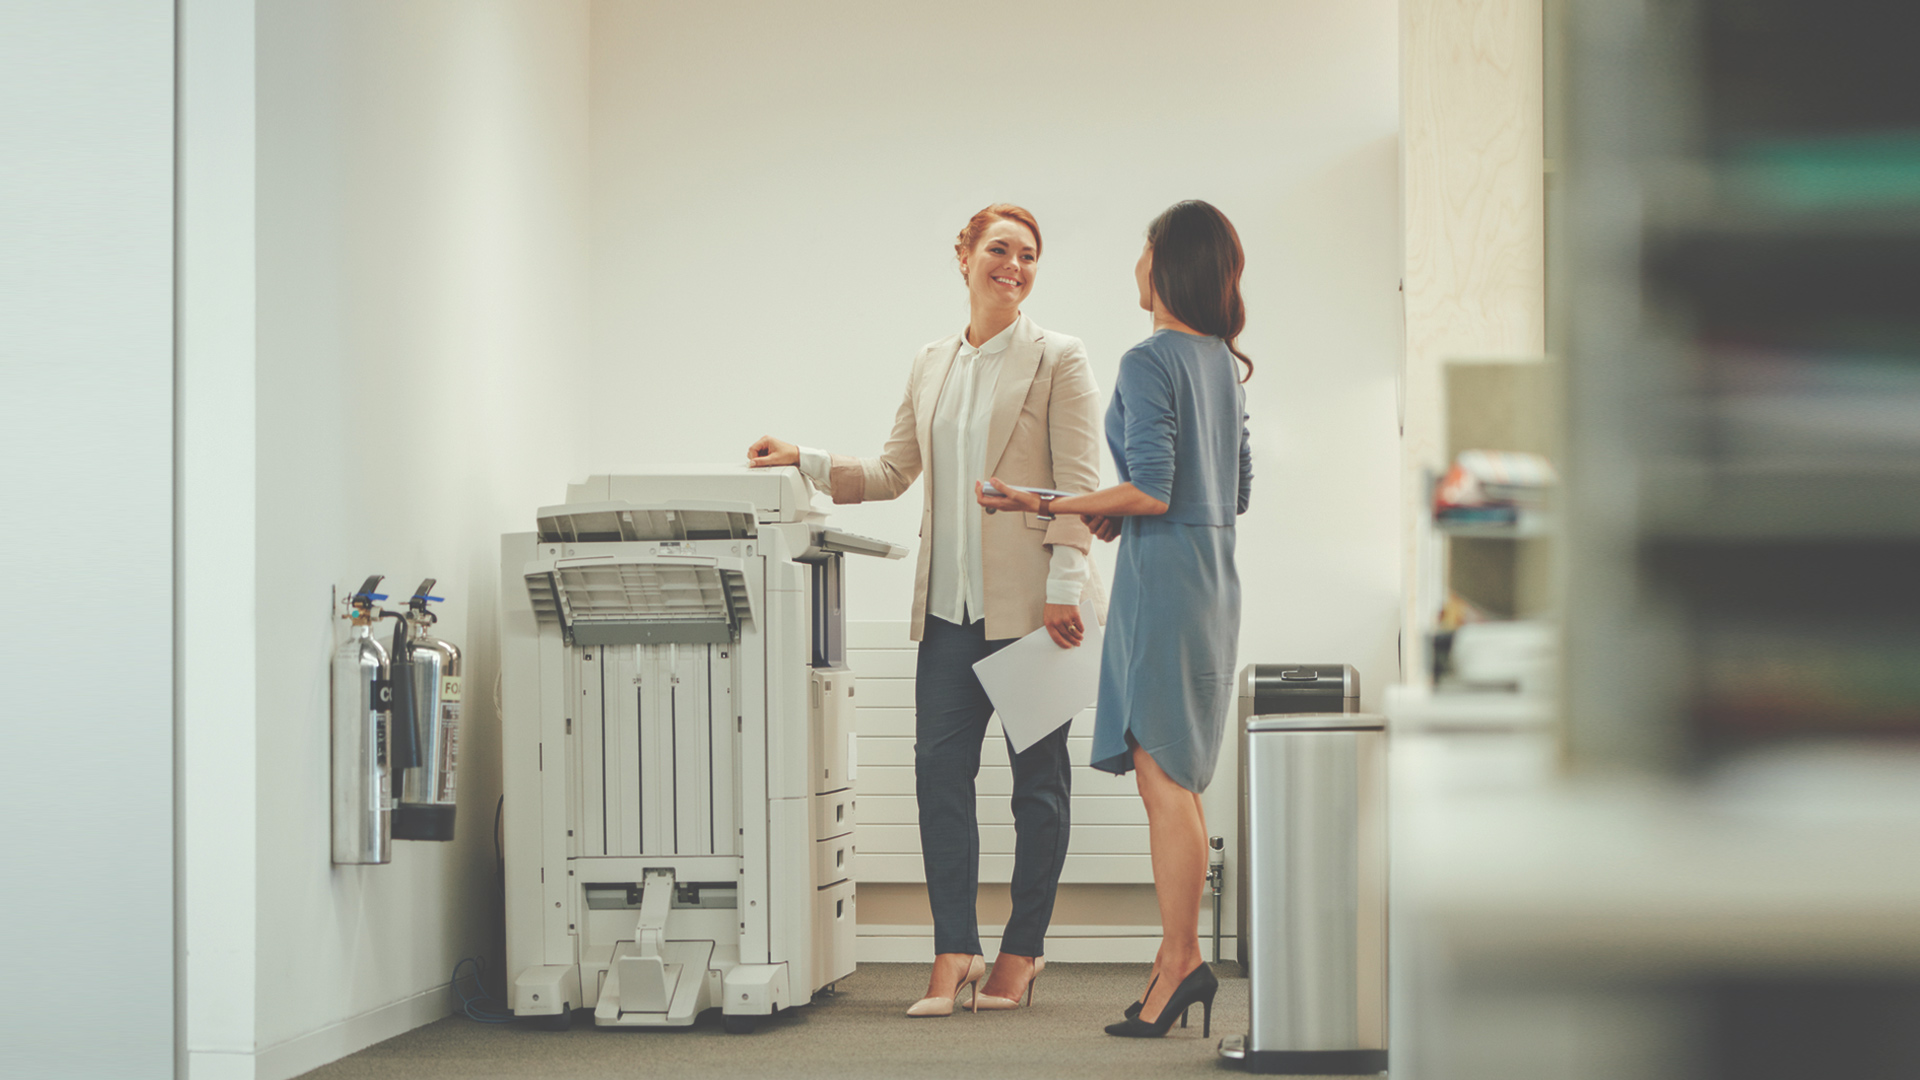 Two women interacting by the copy machine